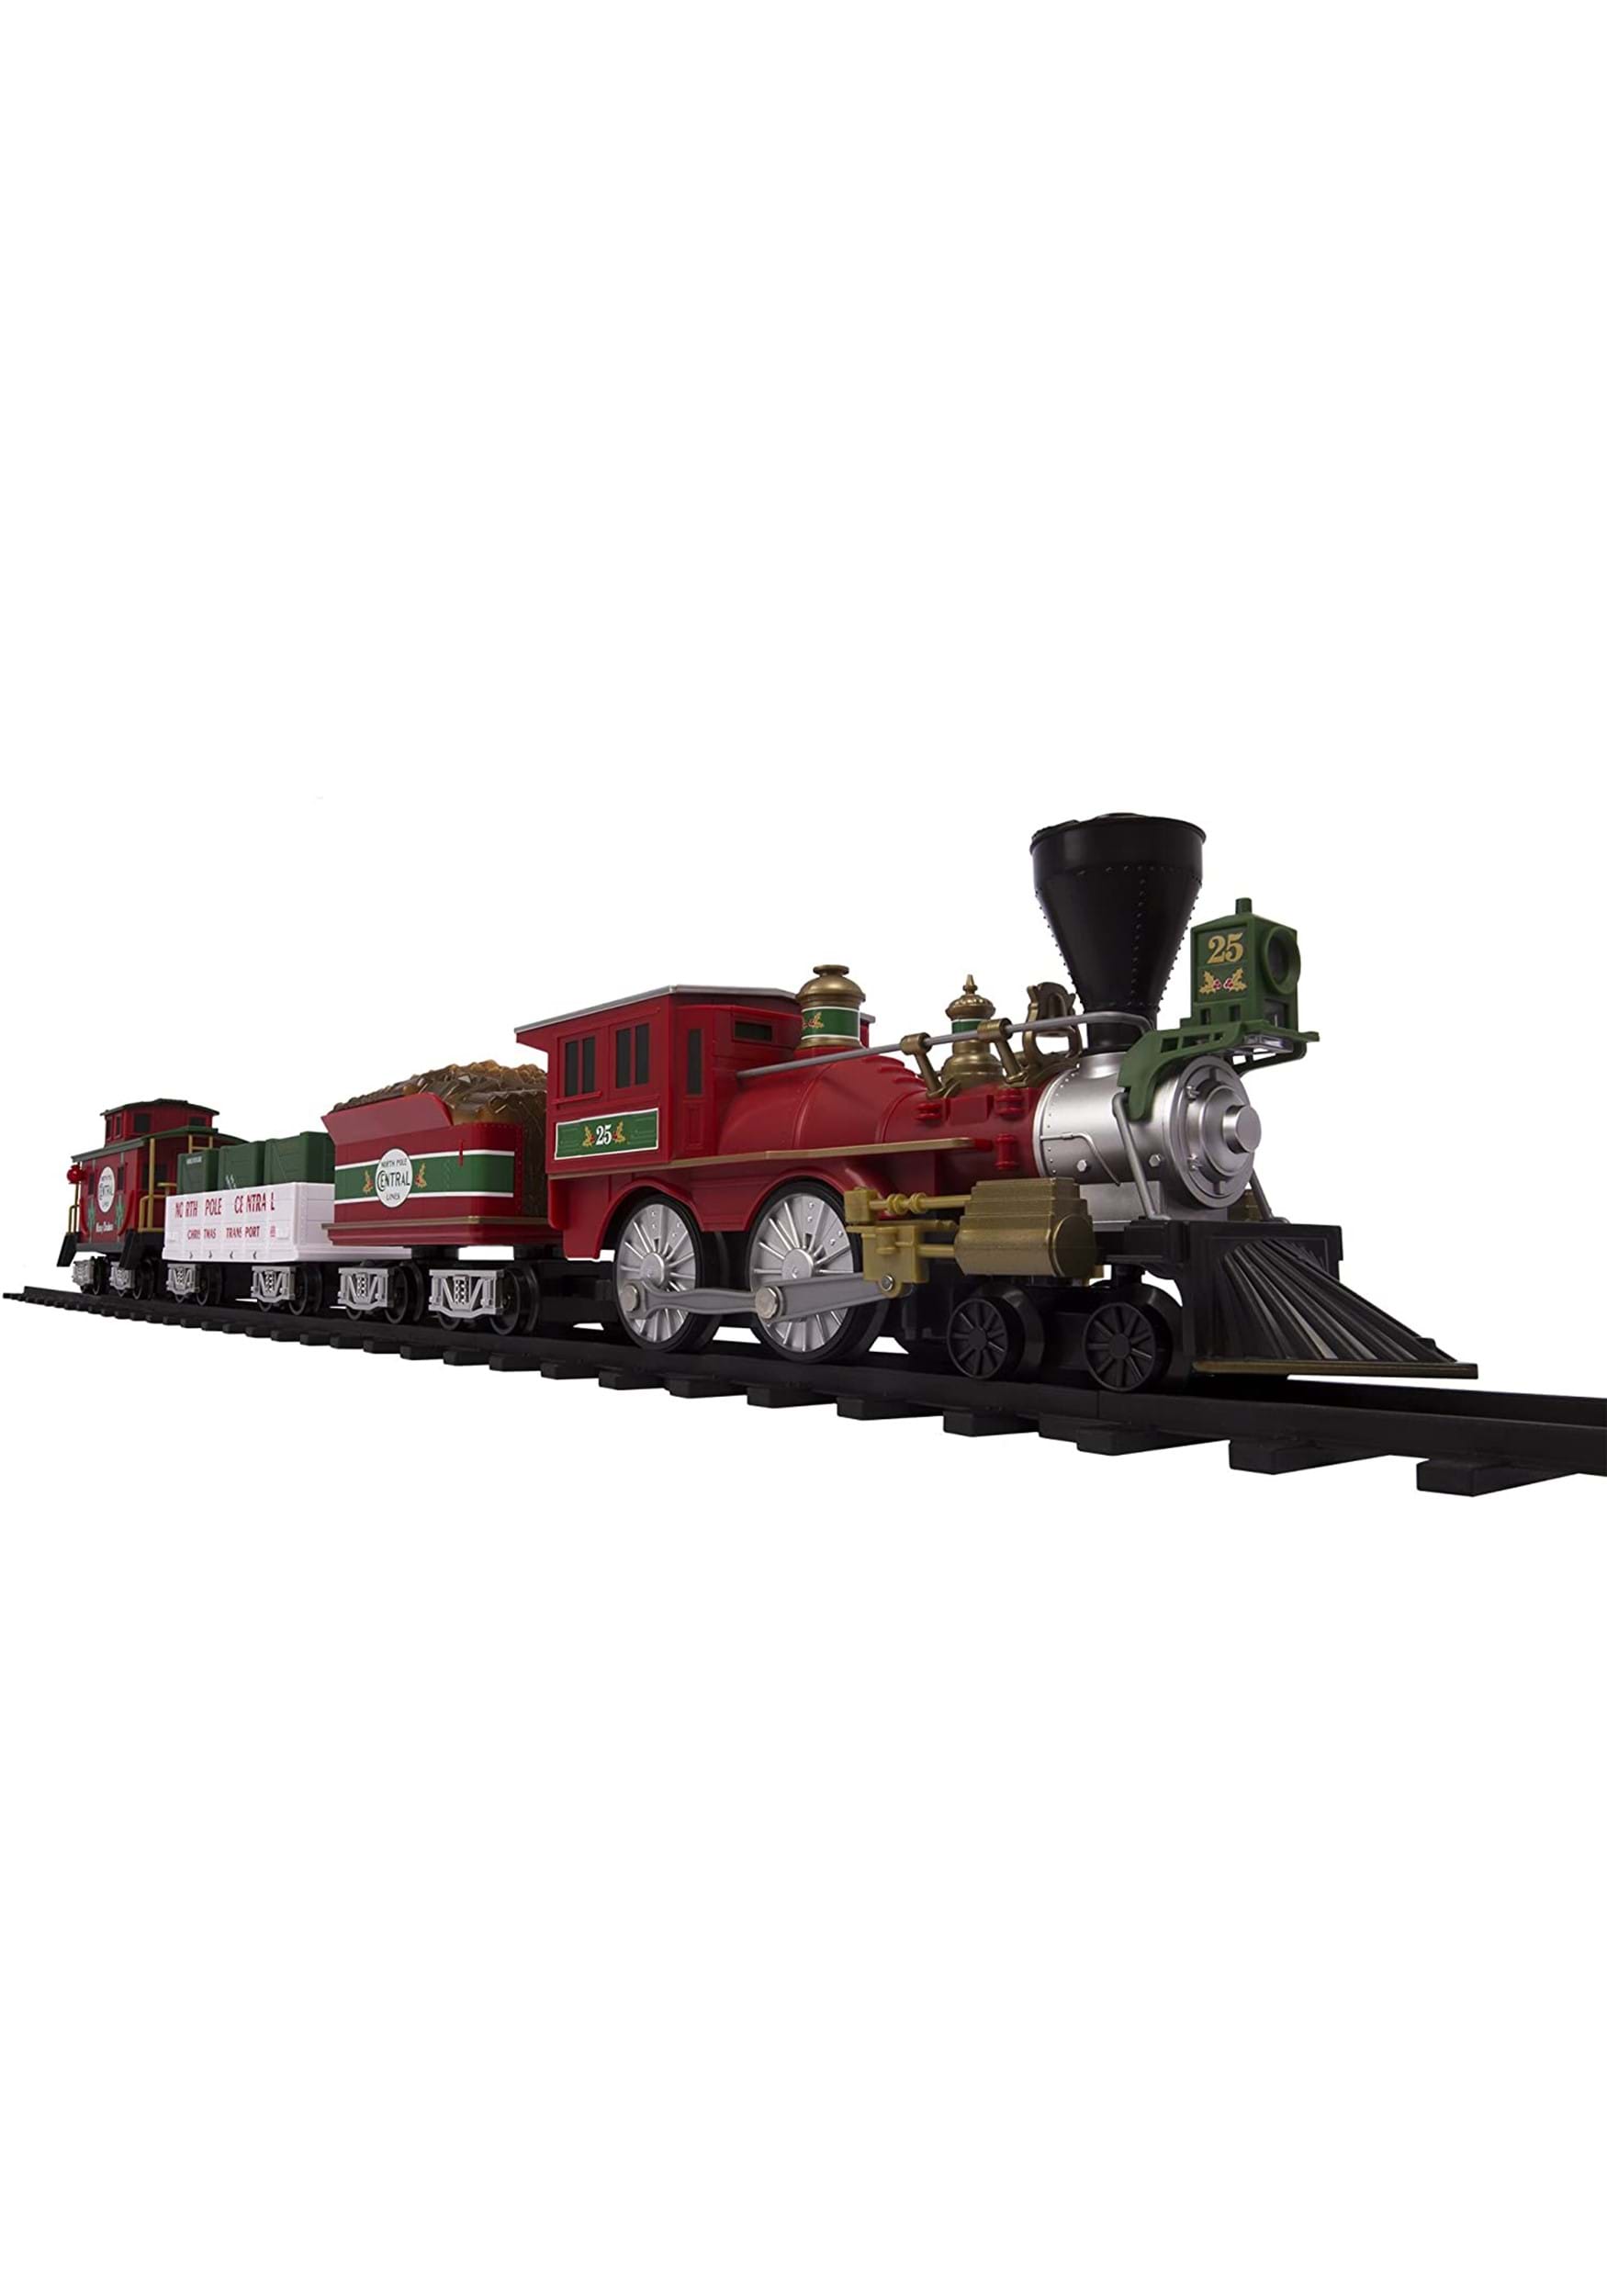 Lionel North Pole Central Ready to Play Train Set